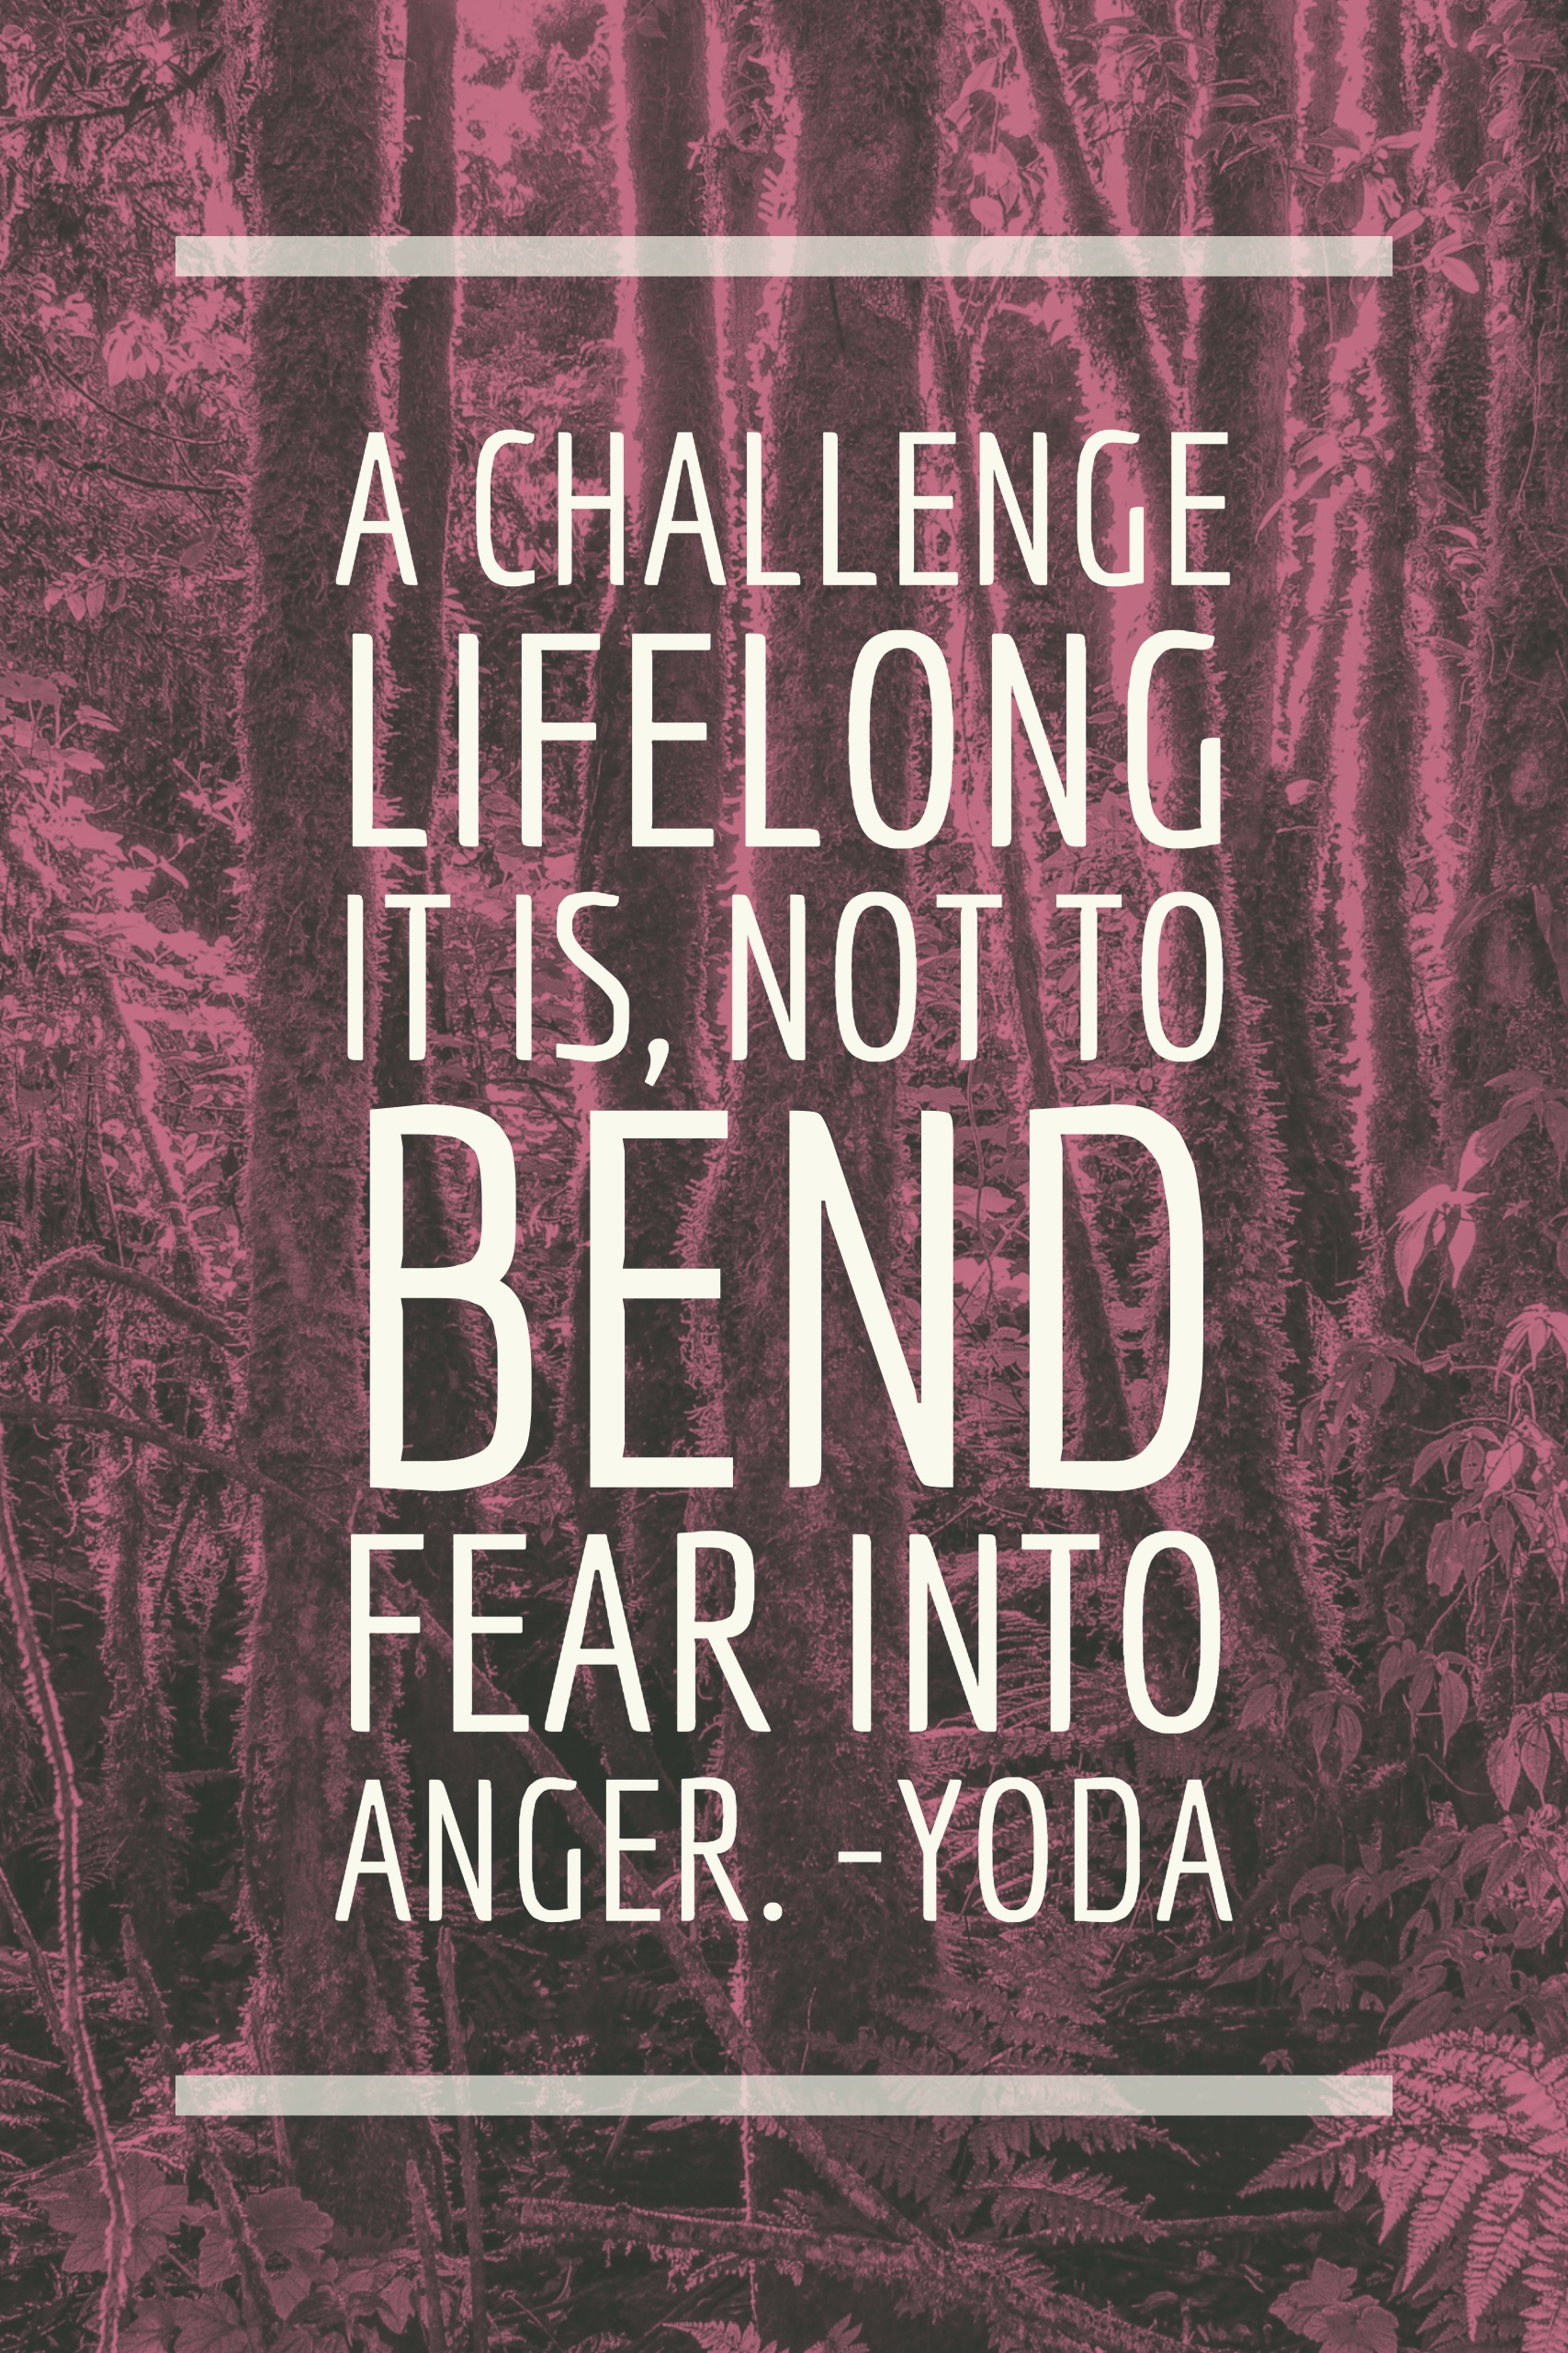 A challenge lifelong it is, not to bend fear into anger.-yoda